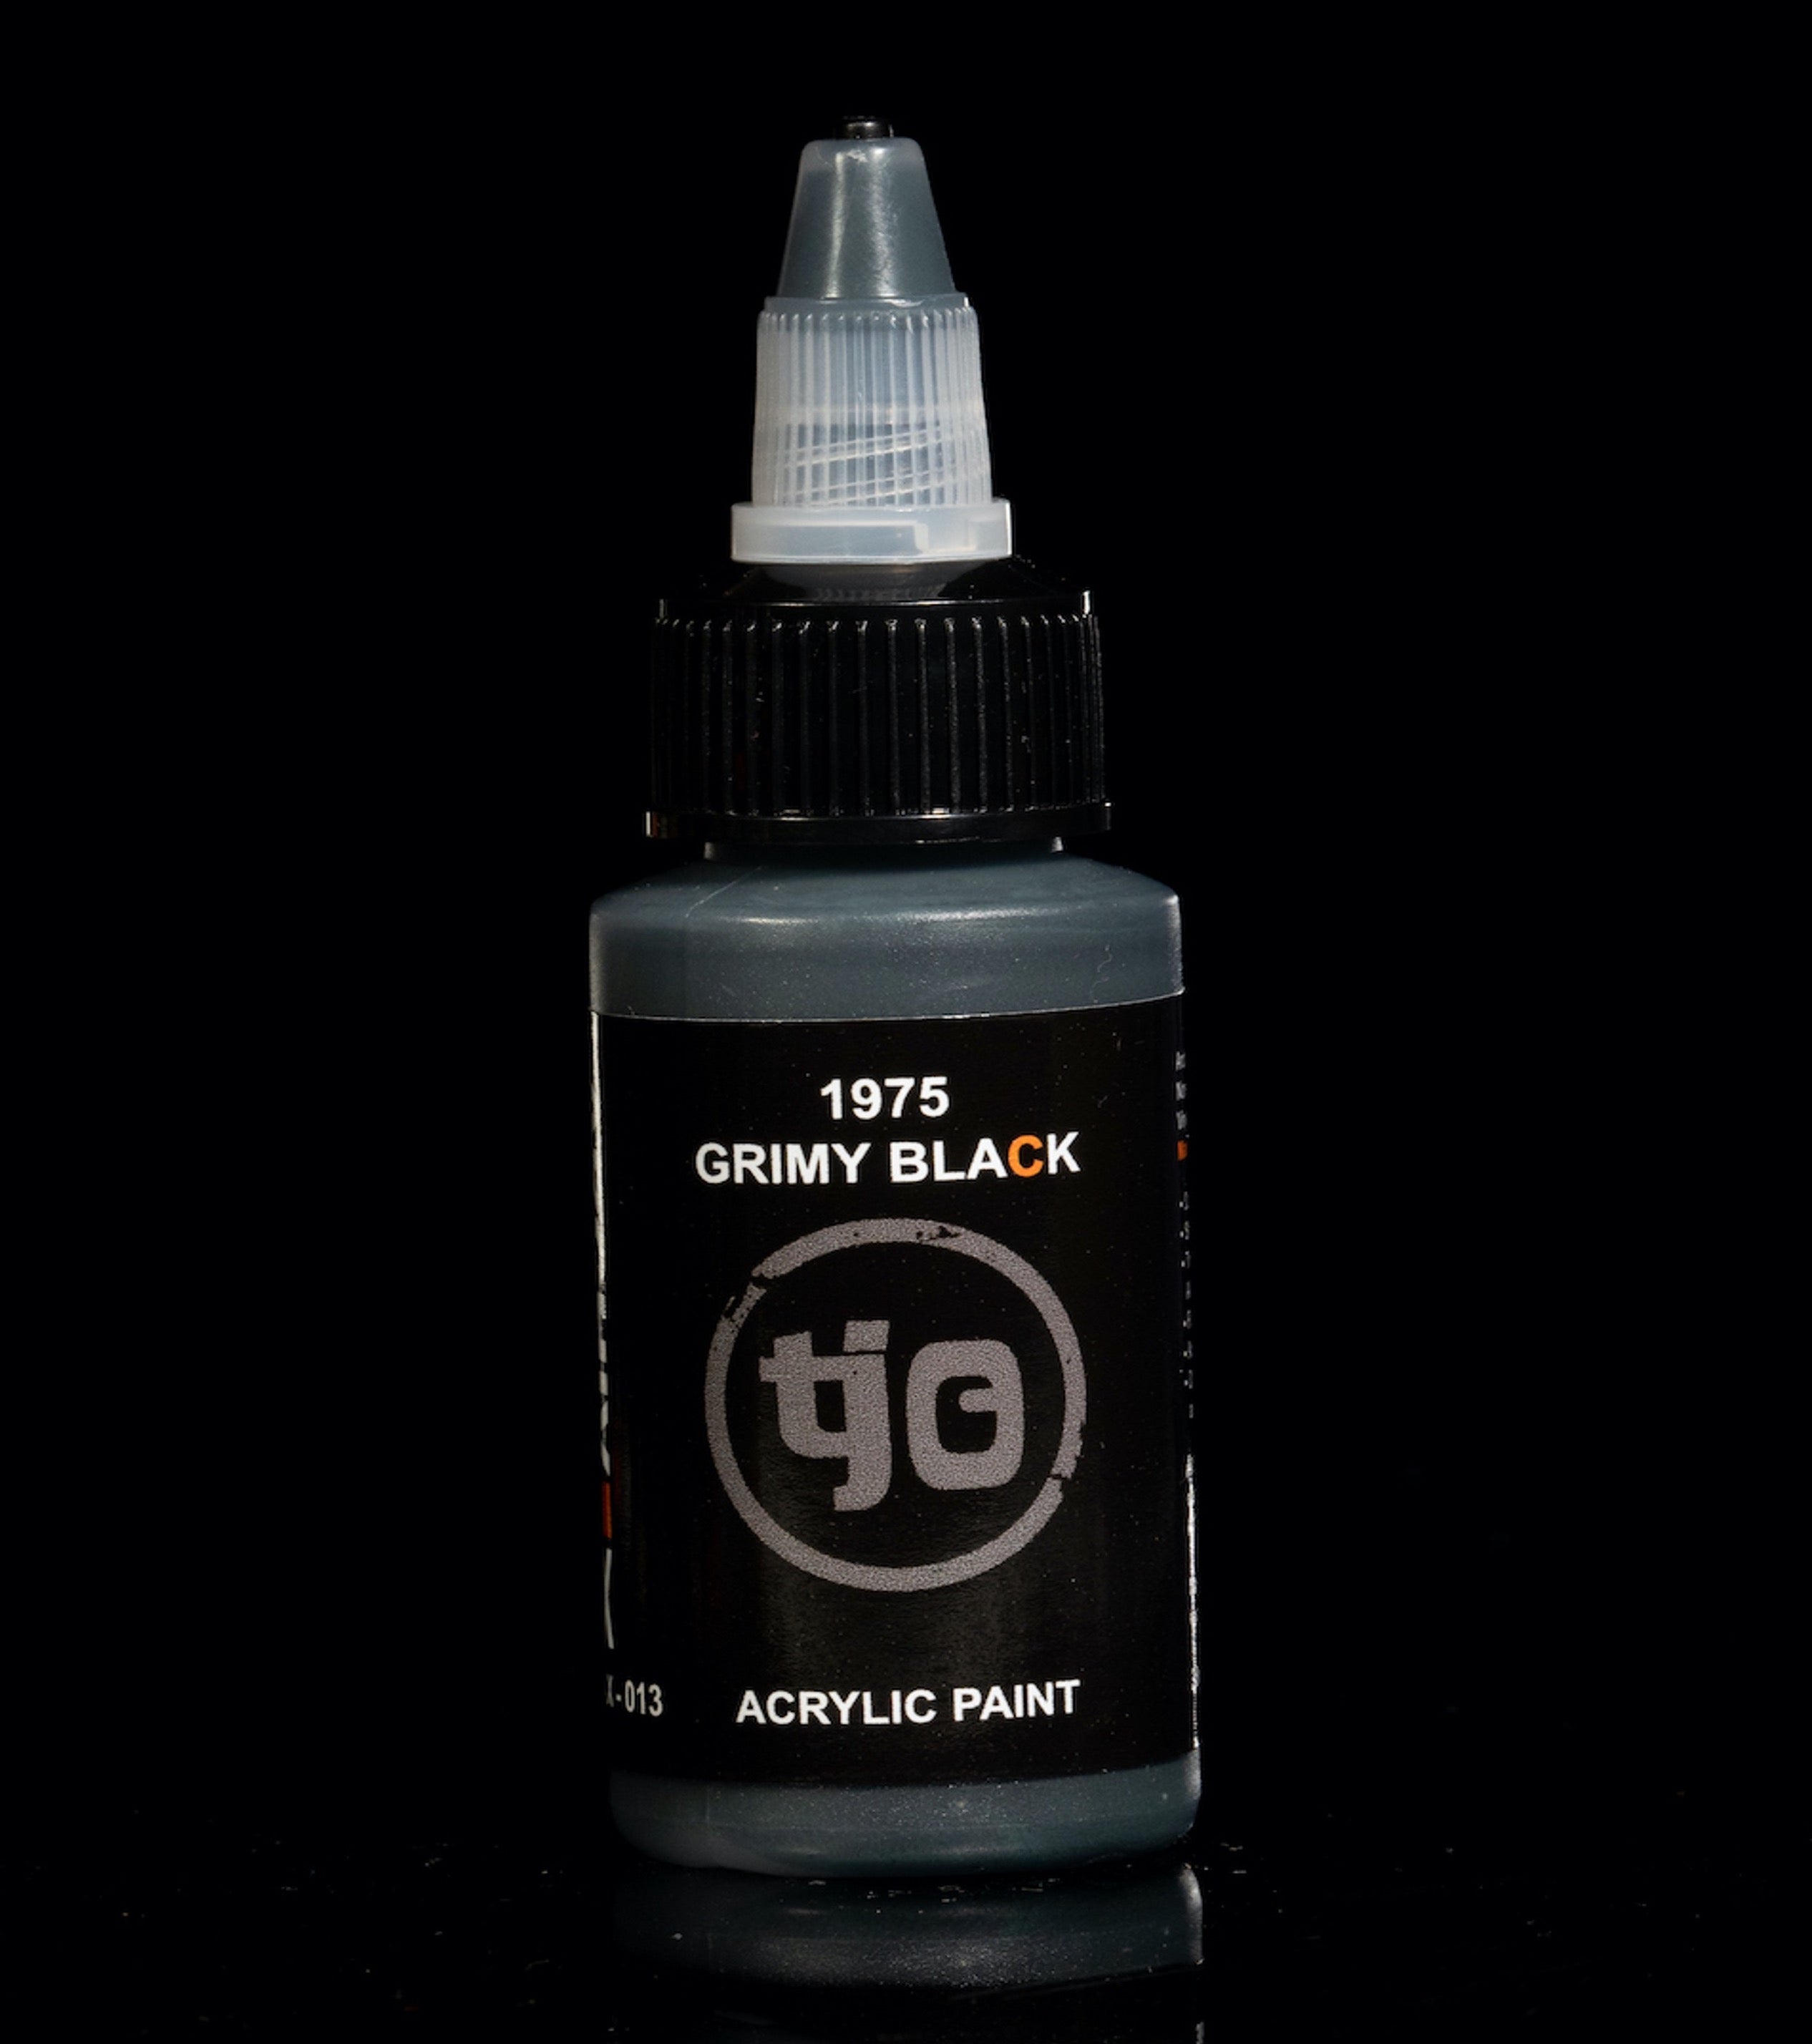 AX-012 1975 Weathered Black Acrylic Paint 30ml – Archive X Paint